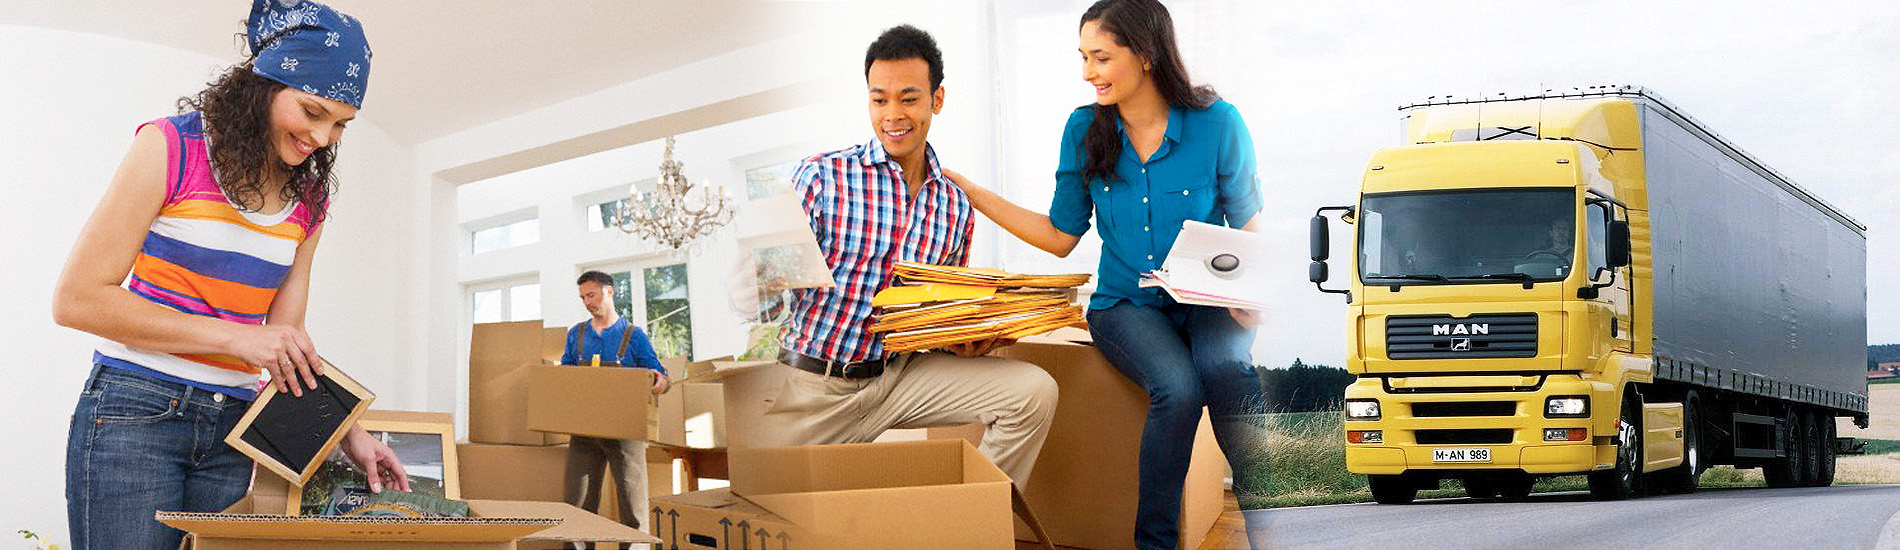 Benefits Of Opting For Professional Packers And Movers For Relocation - WanderGlobe